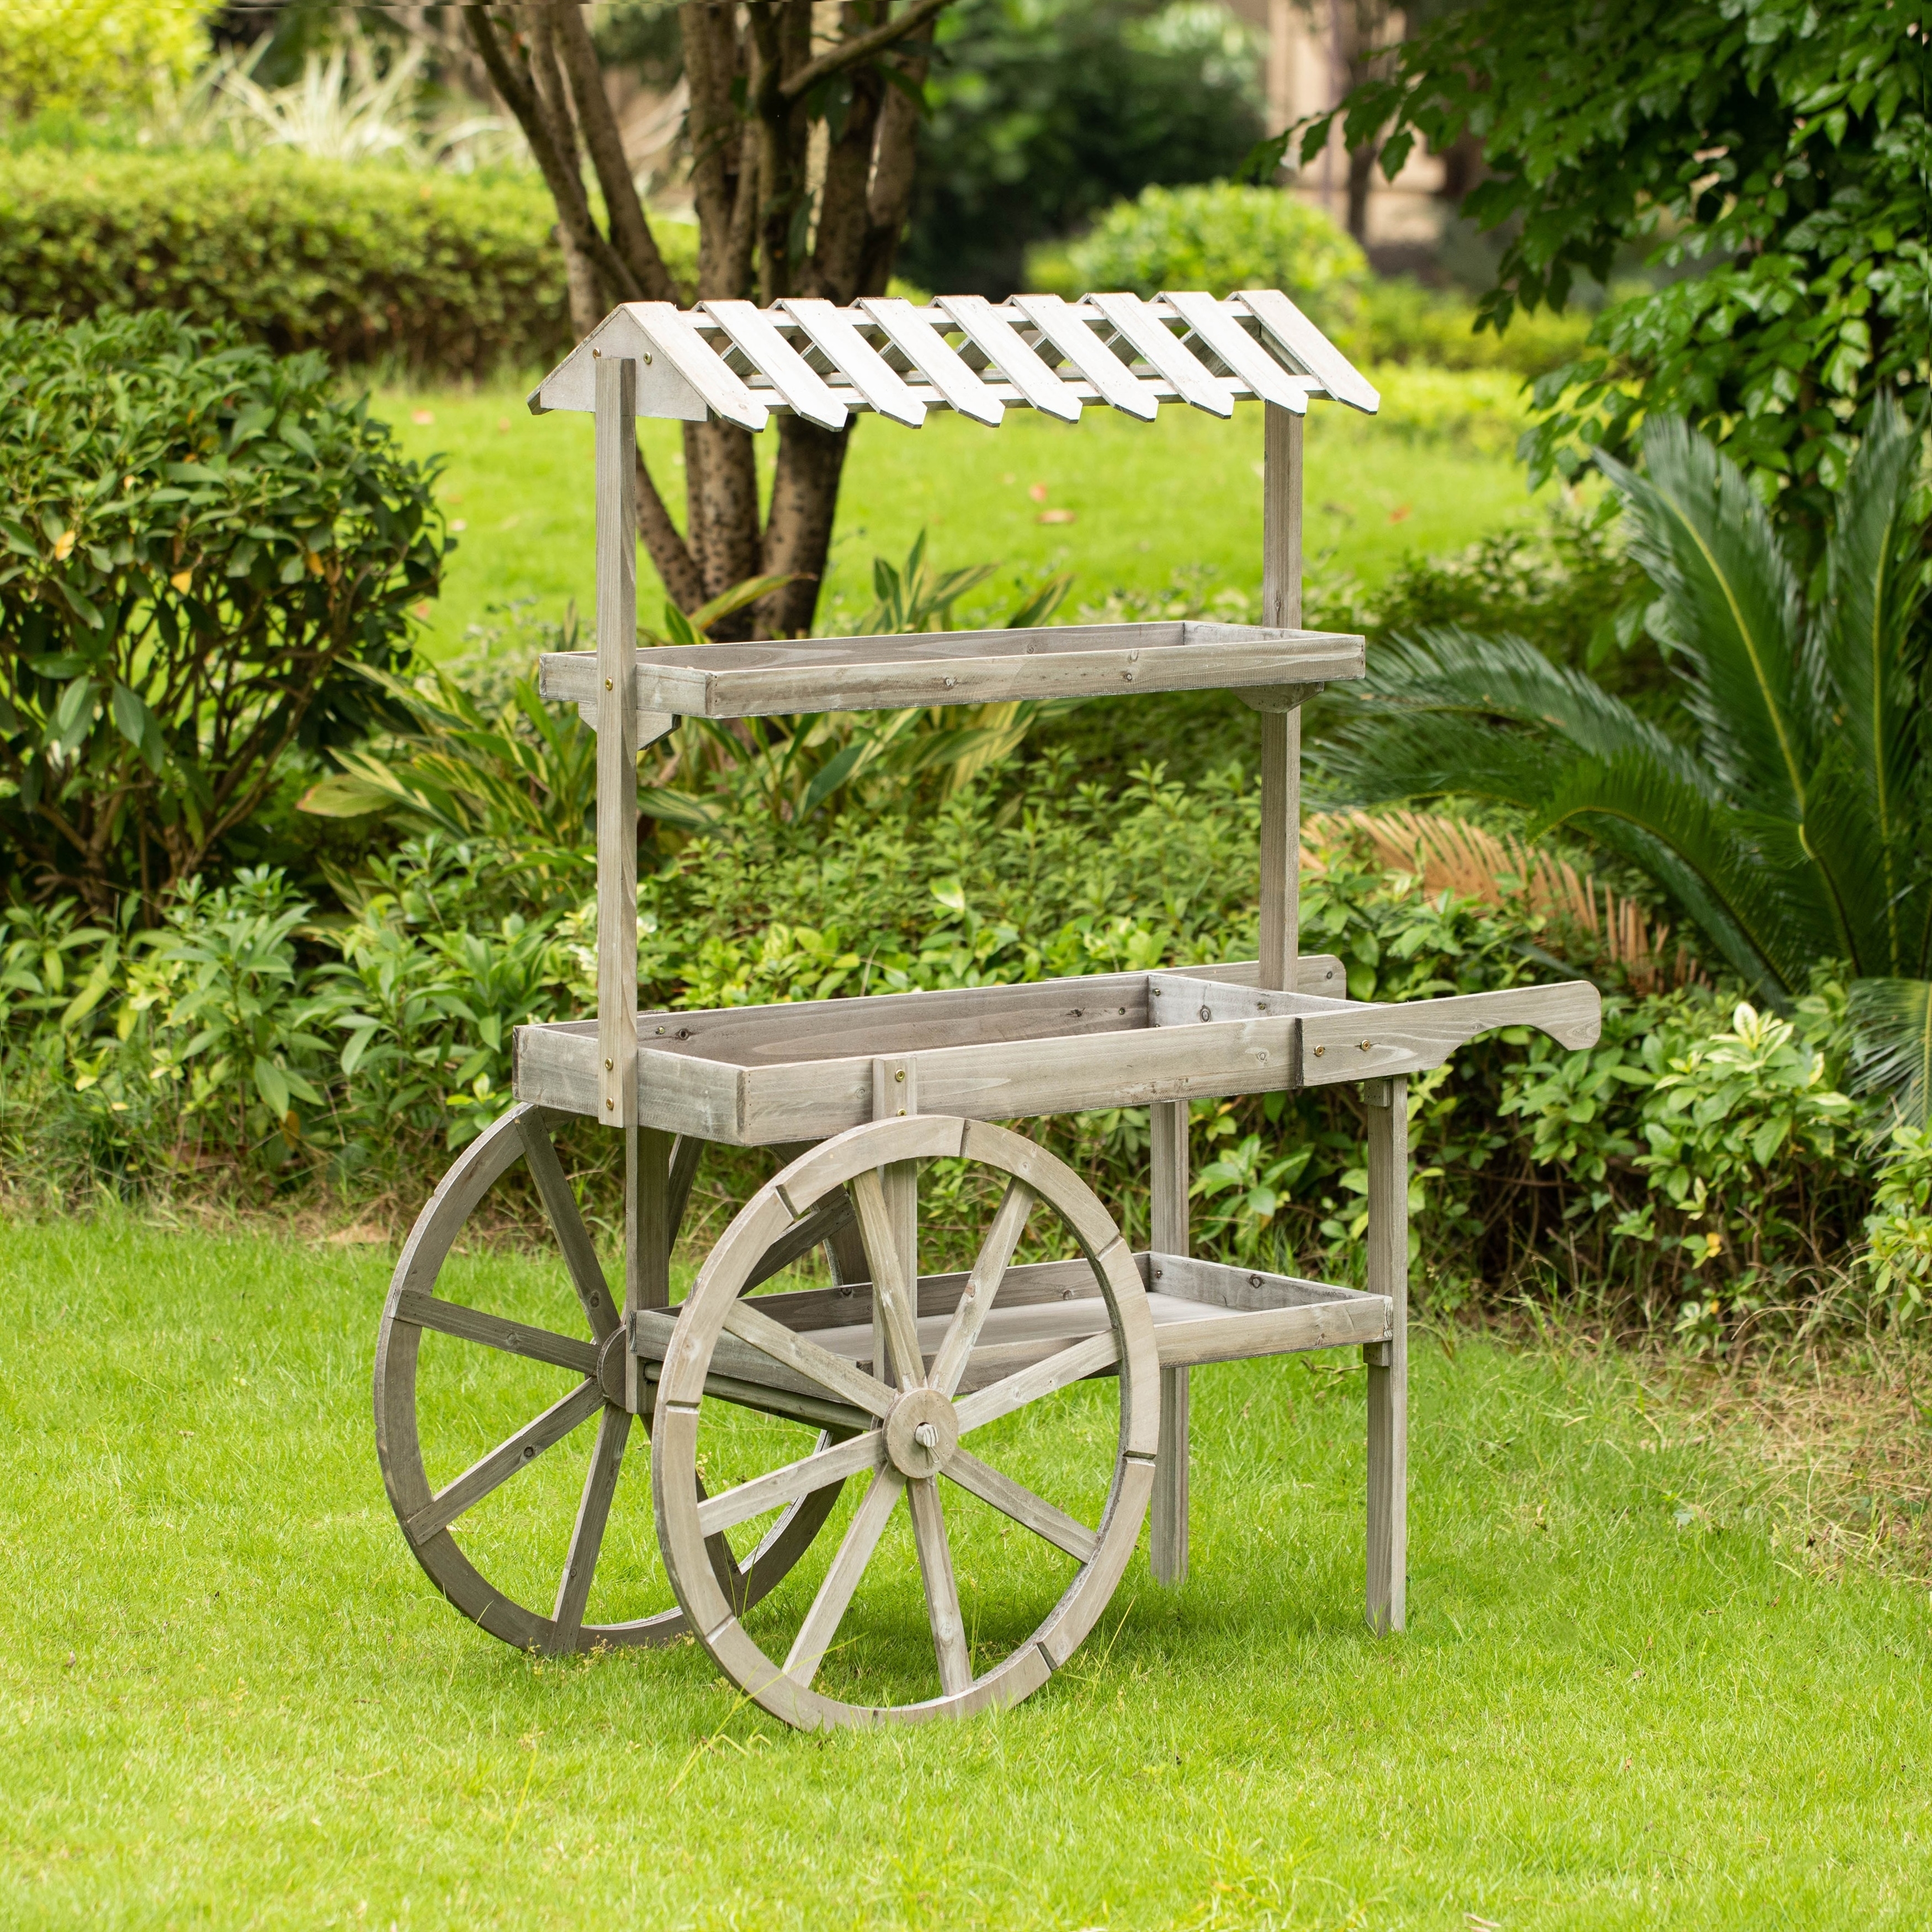 Antique Rustic Solid Wood Decor Display Rack Cart Wood Plant Stand 3 Tier With Wheels For Display, Wood Wagon With Shelves For Plants And Mo